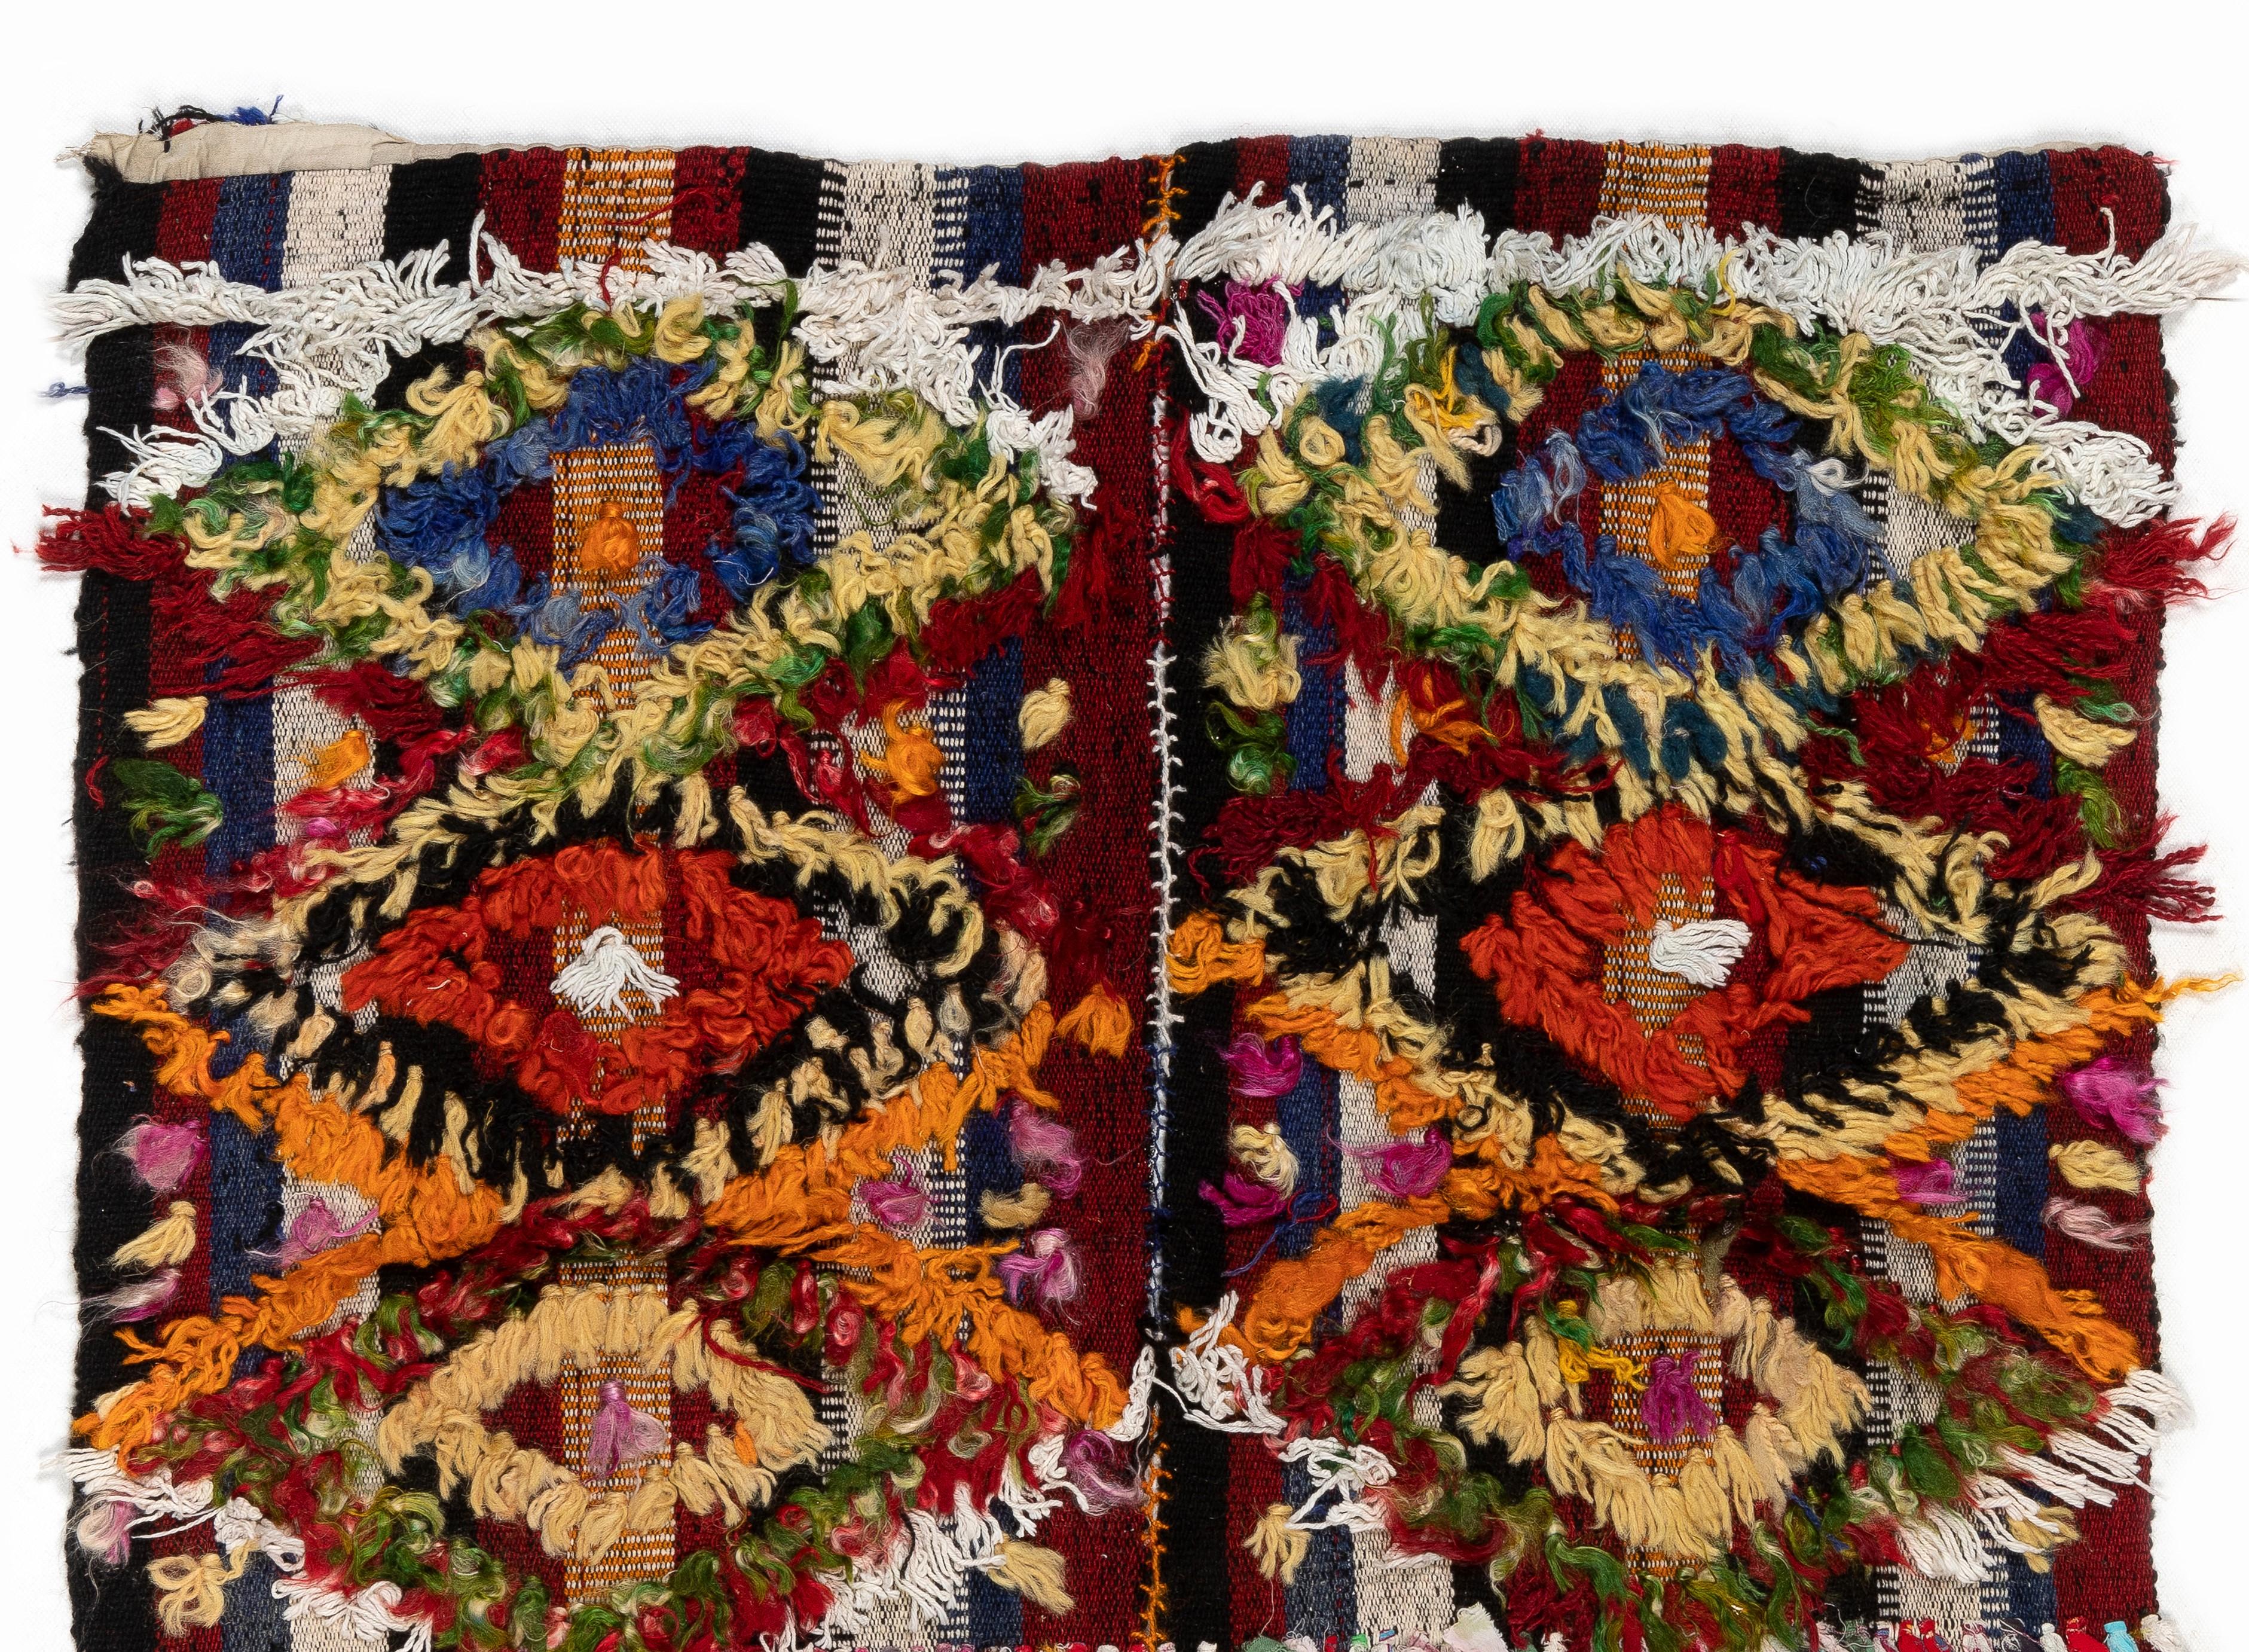 3x3.4 ft Hand-Woven Vintage Anatolian Wall Hanging Kilim with Colorful Poms In Good Condition For Sale In Philadelphia, PA